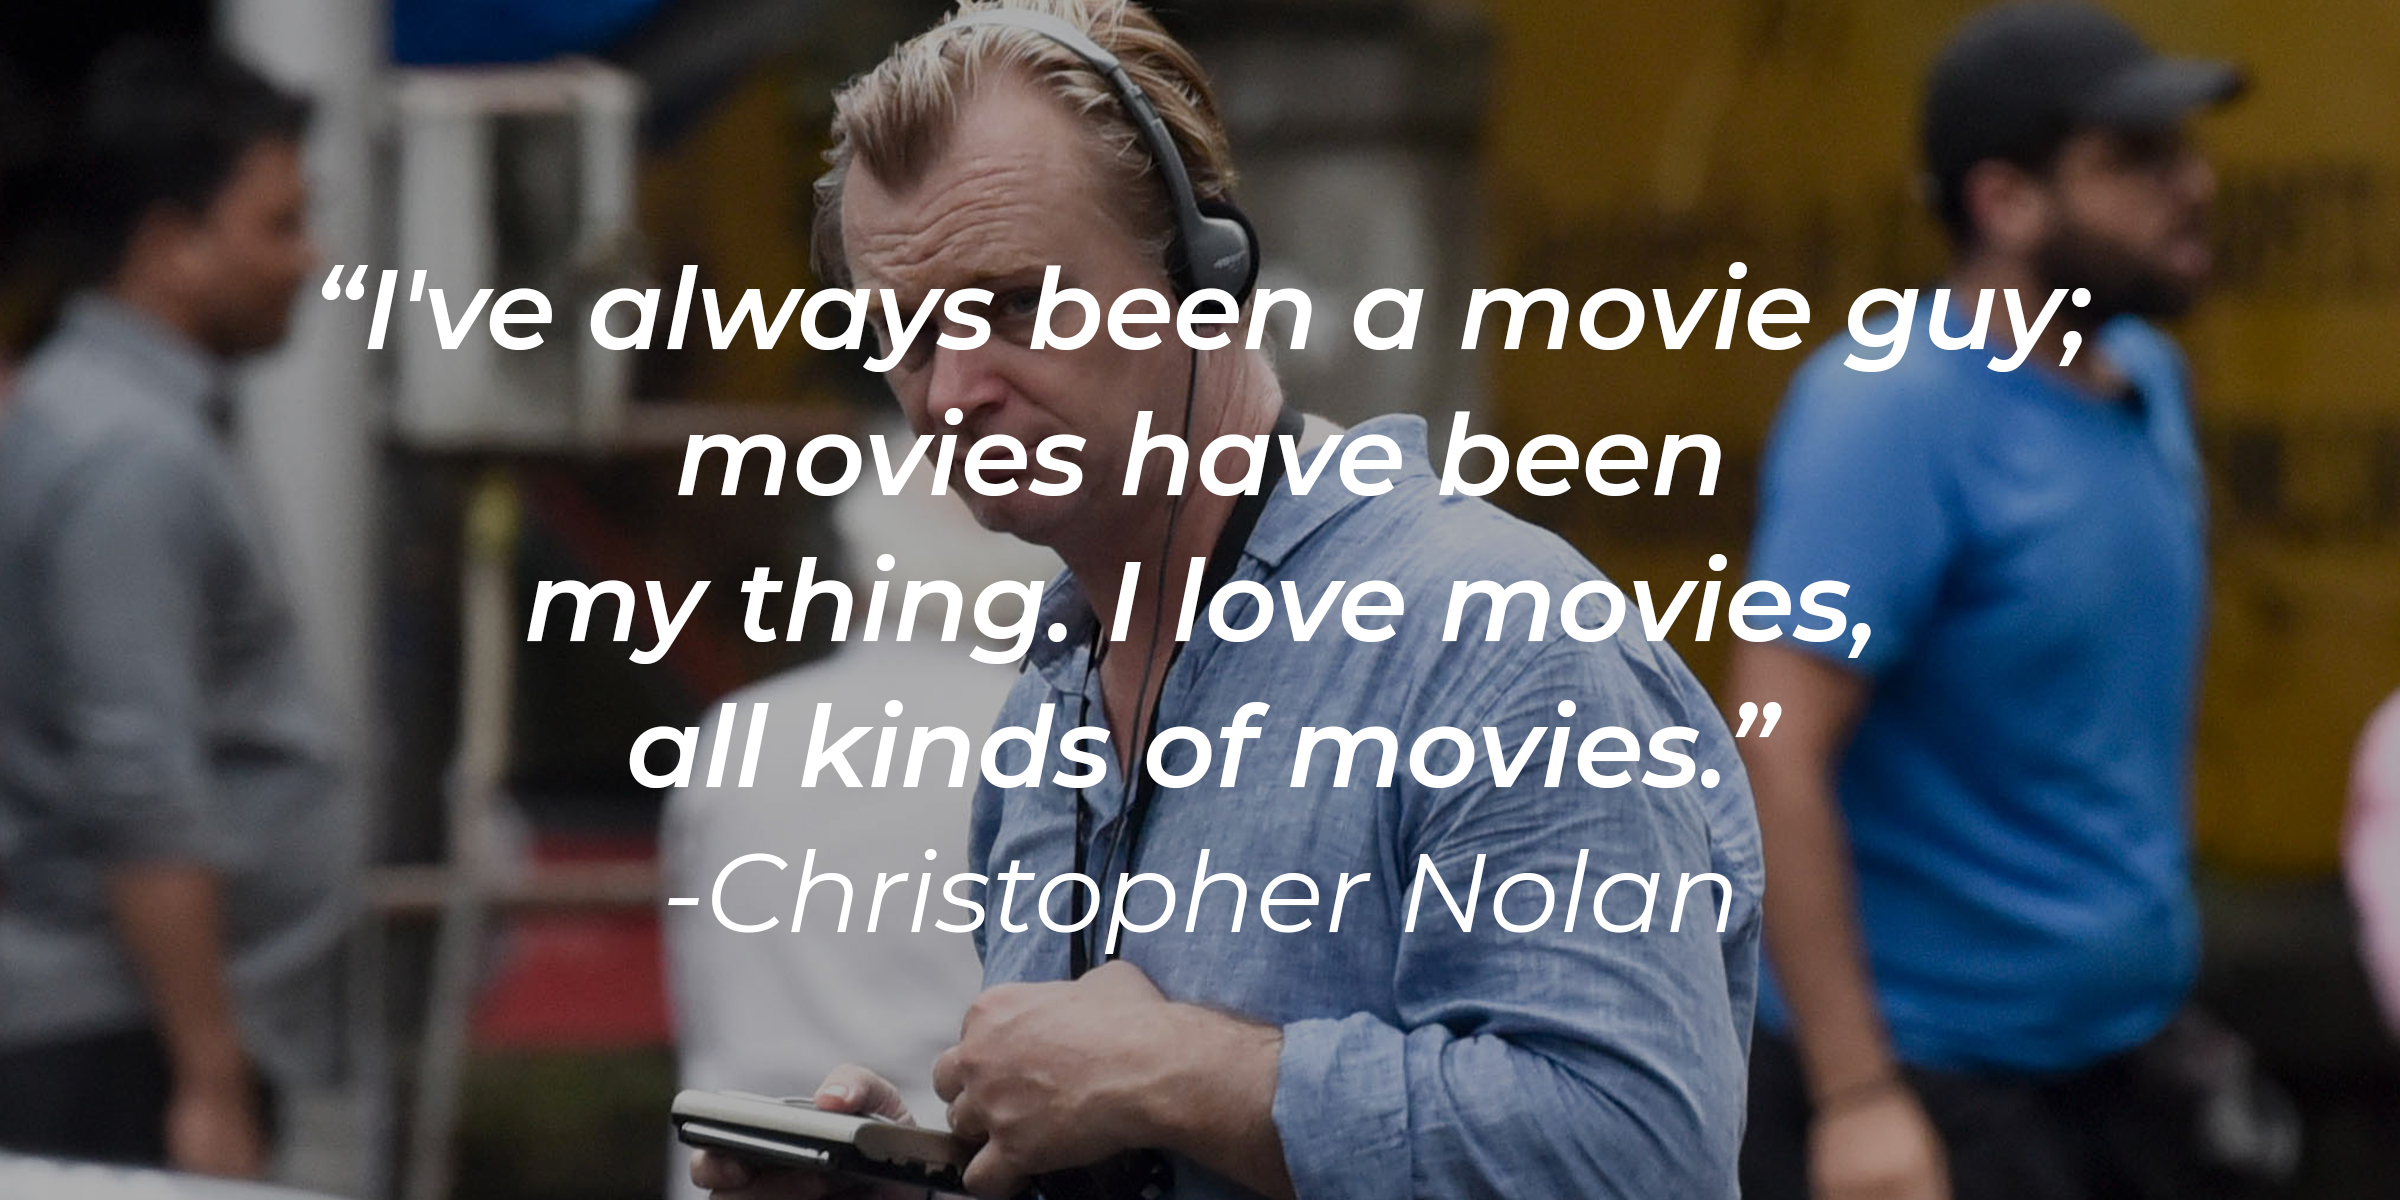 Christopher Nolan, with his quote: “I've always been a movie guy; movies have been my thing. I love movies, all kinds of movies.” | Source: Getty Images